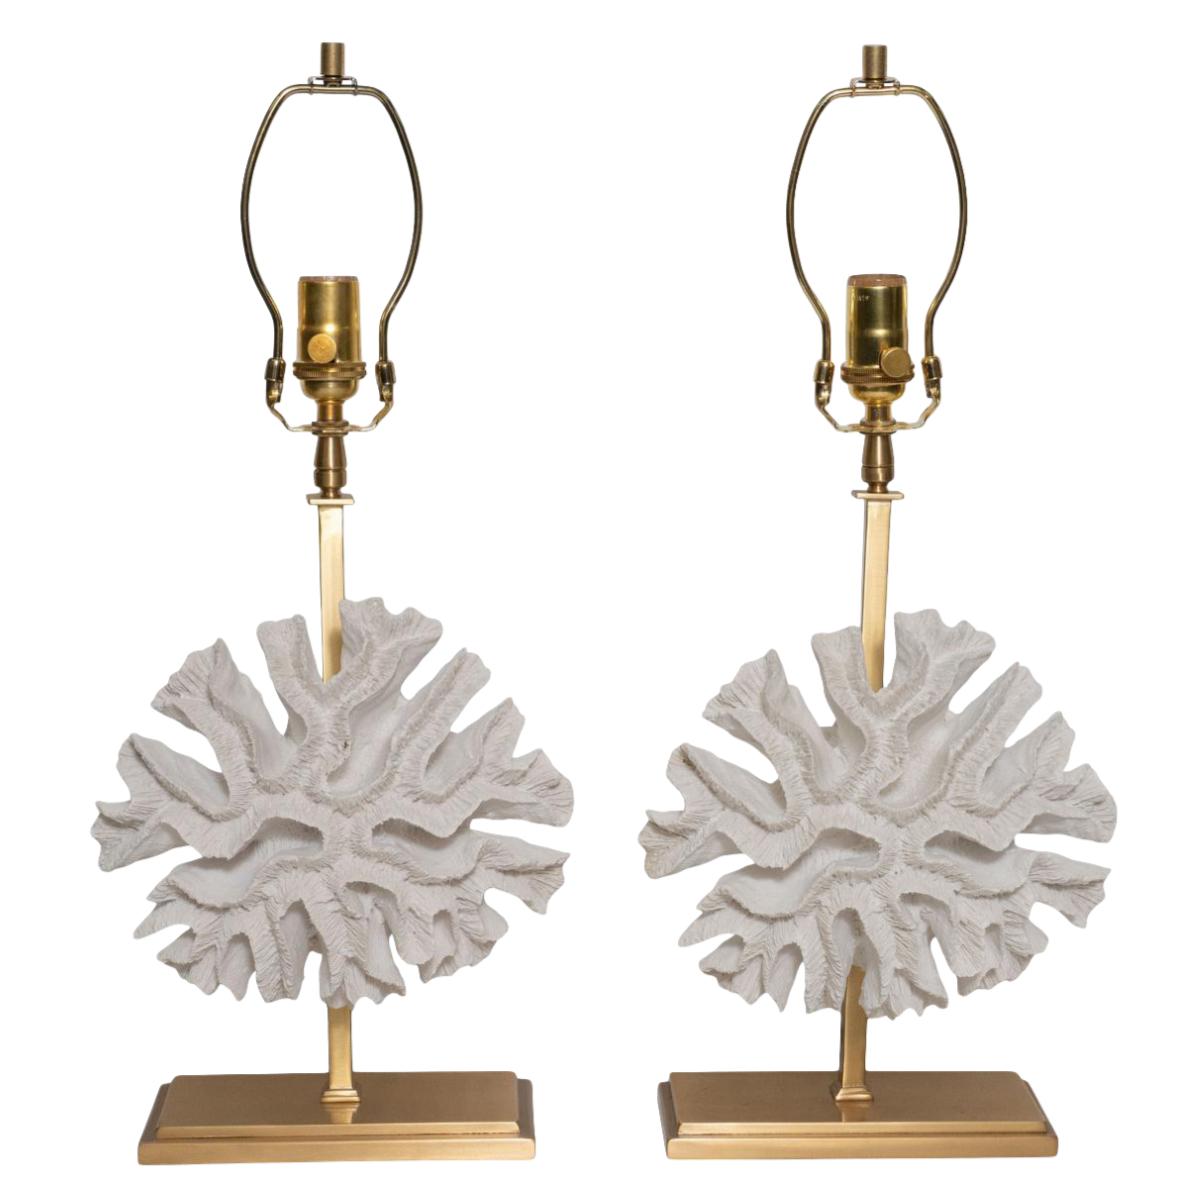 Pair of faux coral plaster table lamps with acrylic mounting and brass pedestal style hardware by Marcelo Bessa for Spark Interior.